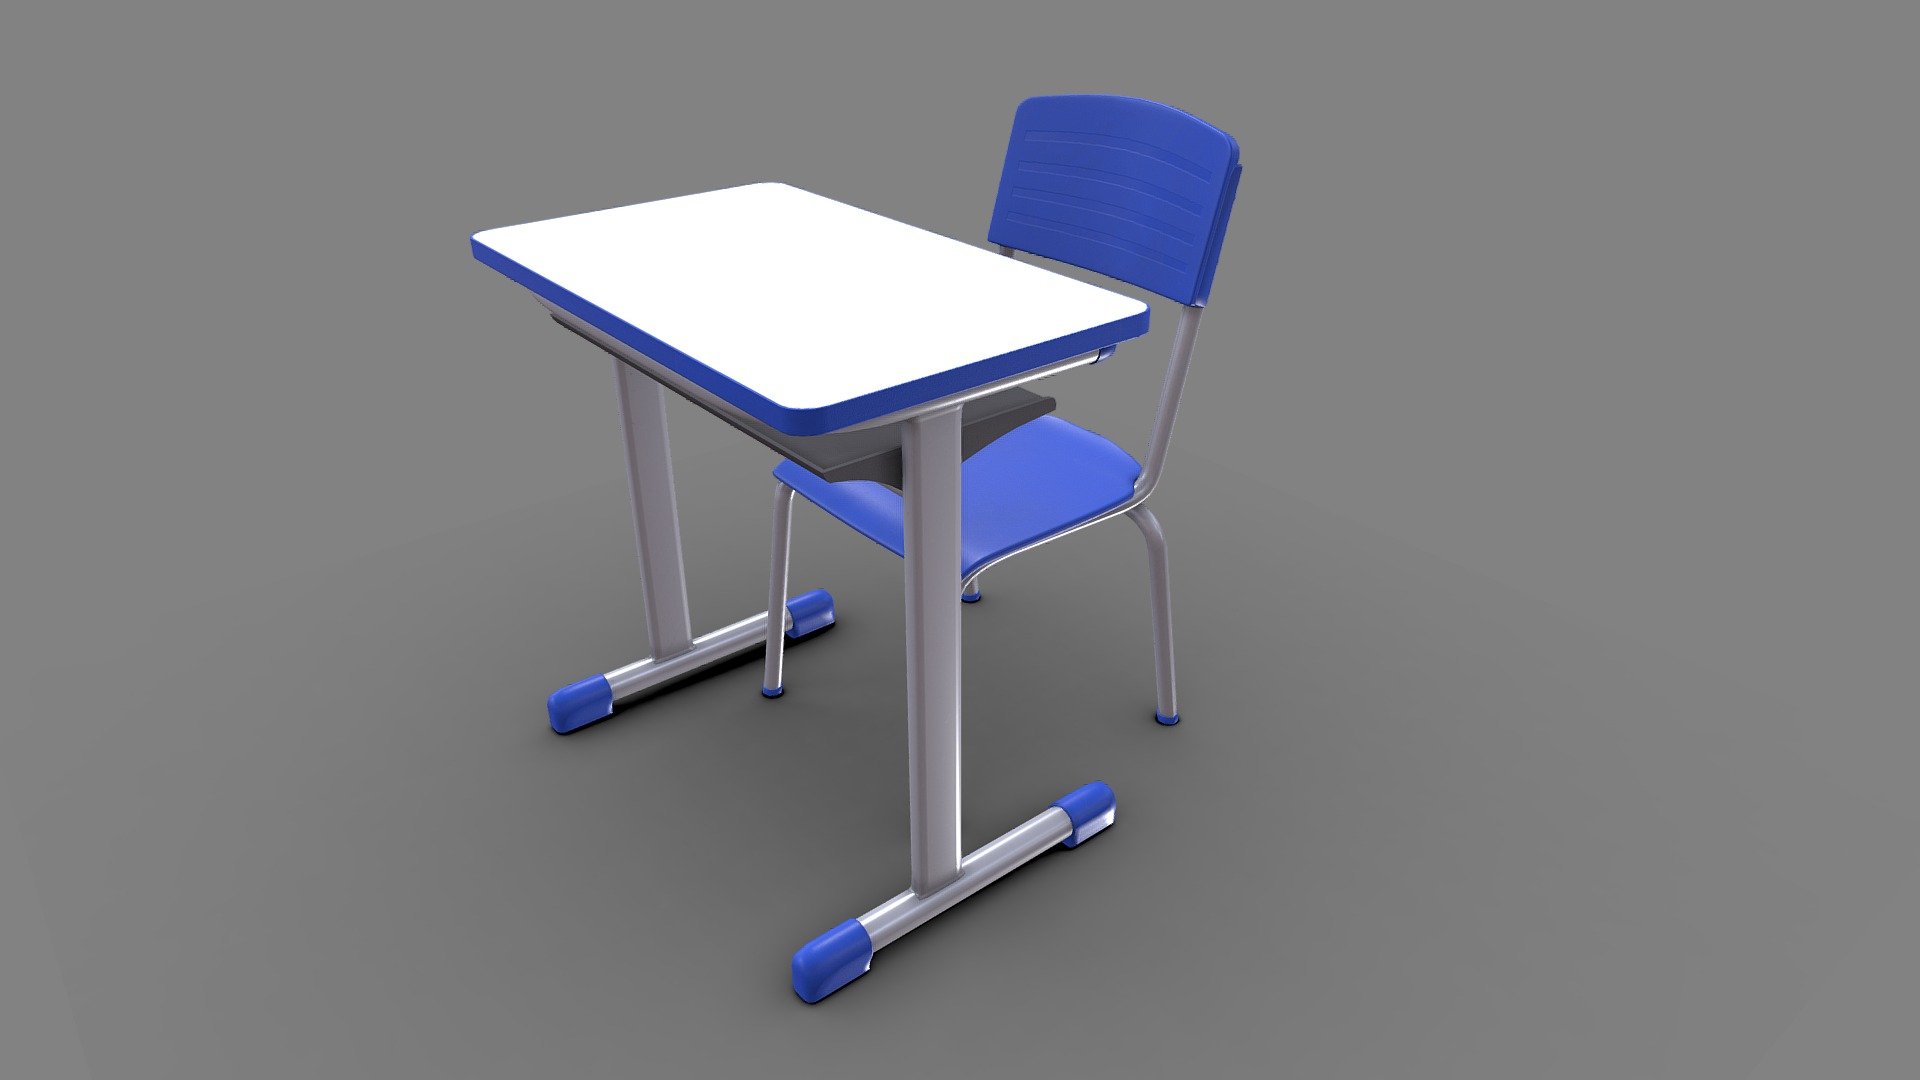 Features:




Low poly.

optimized.

Parts separated and nomed.

Easy to modify.

Easy to change color

All formats tested and working.

Textures included and materials applied.

Textures PBR MetalRough and SpecGloss 4096x4096
 - School Table And Chair - Buy Royalty Free 3D model by Elvair Lima (@elvair) 3d model